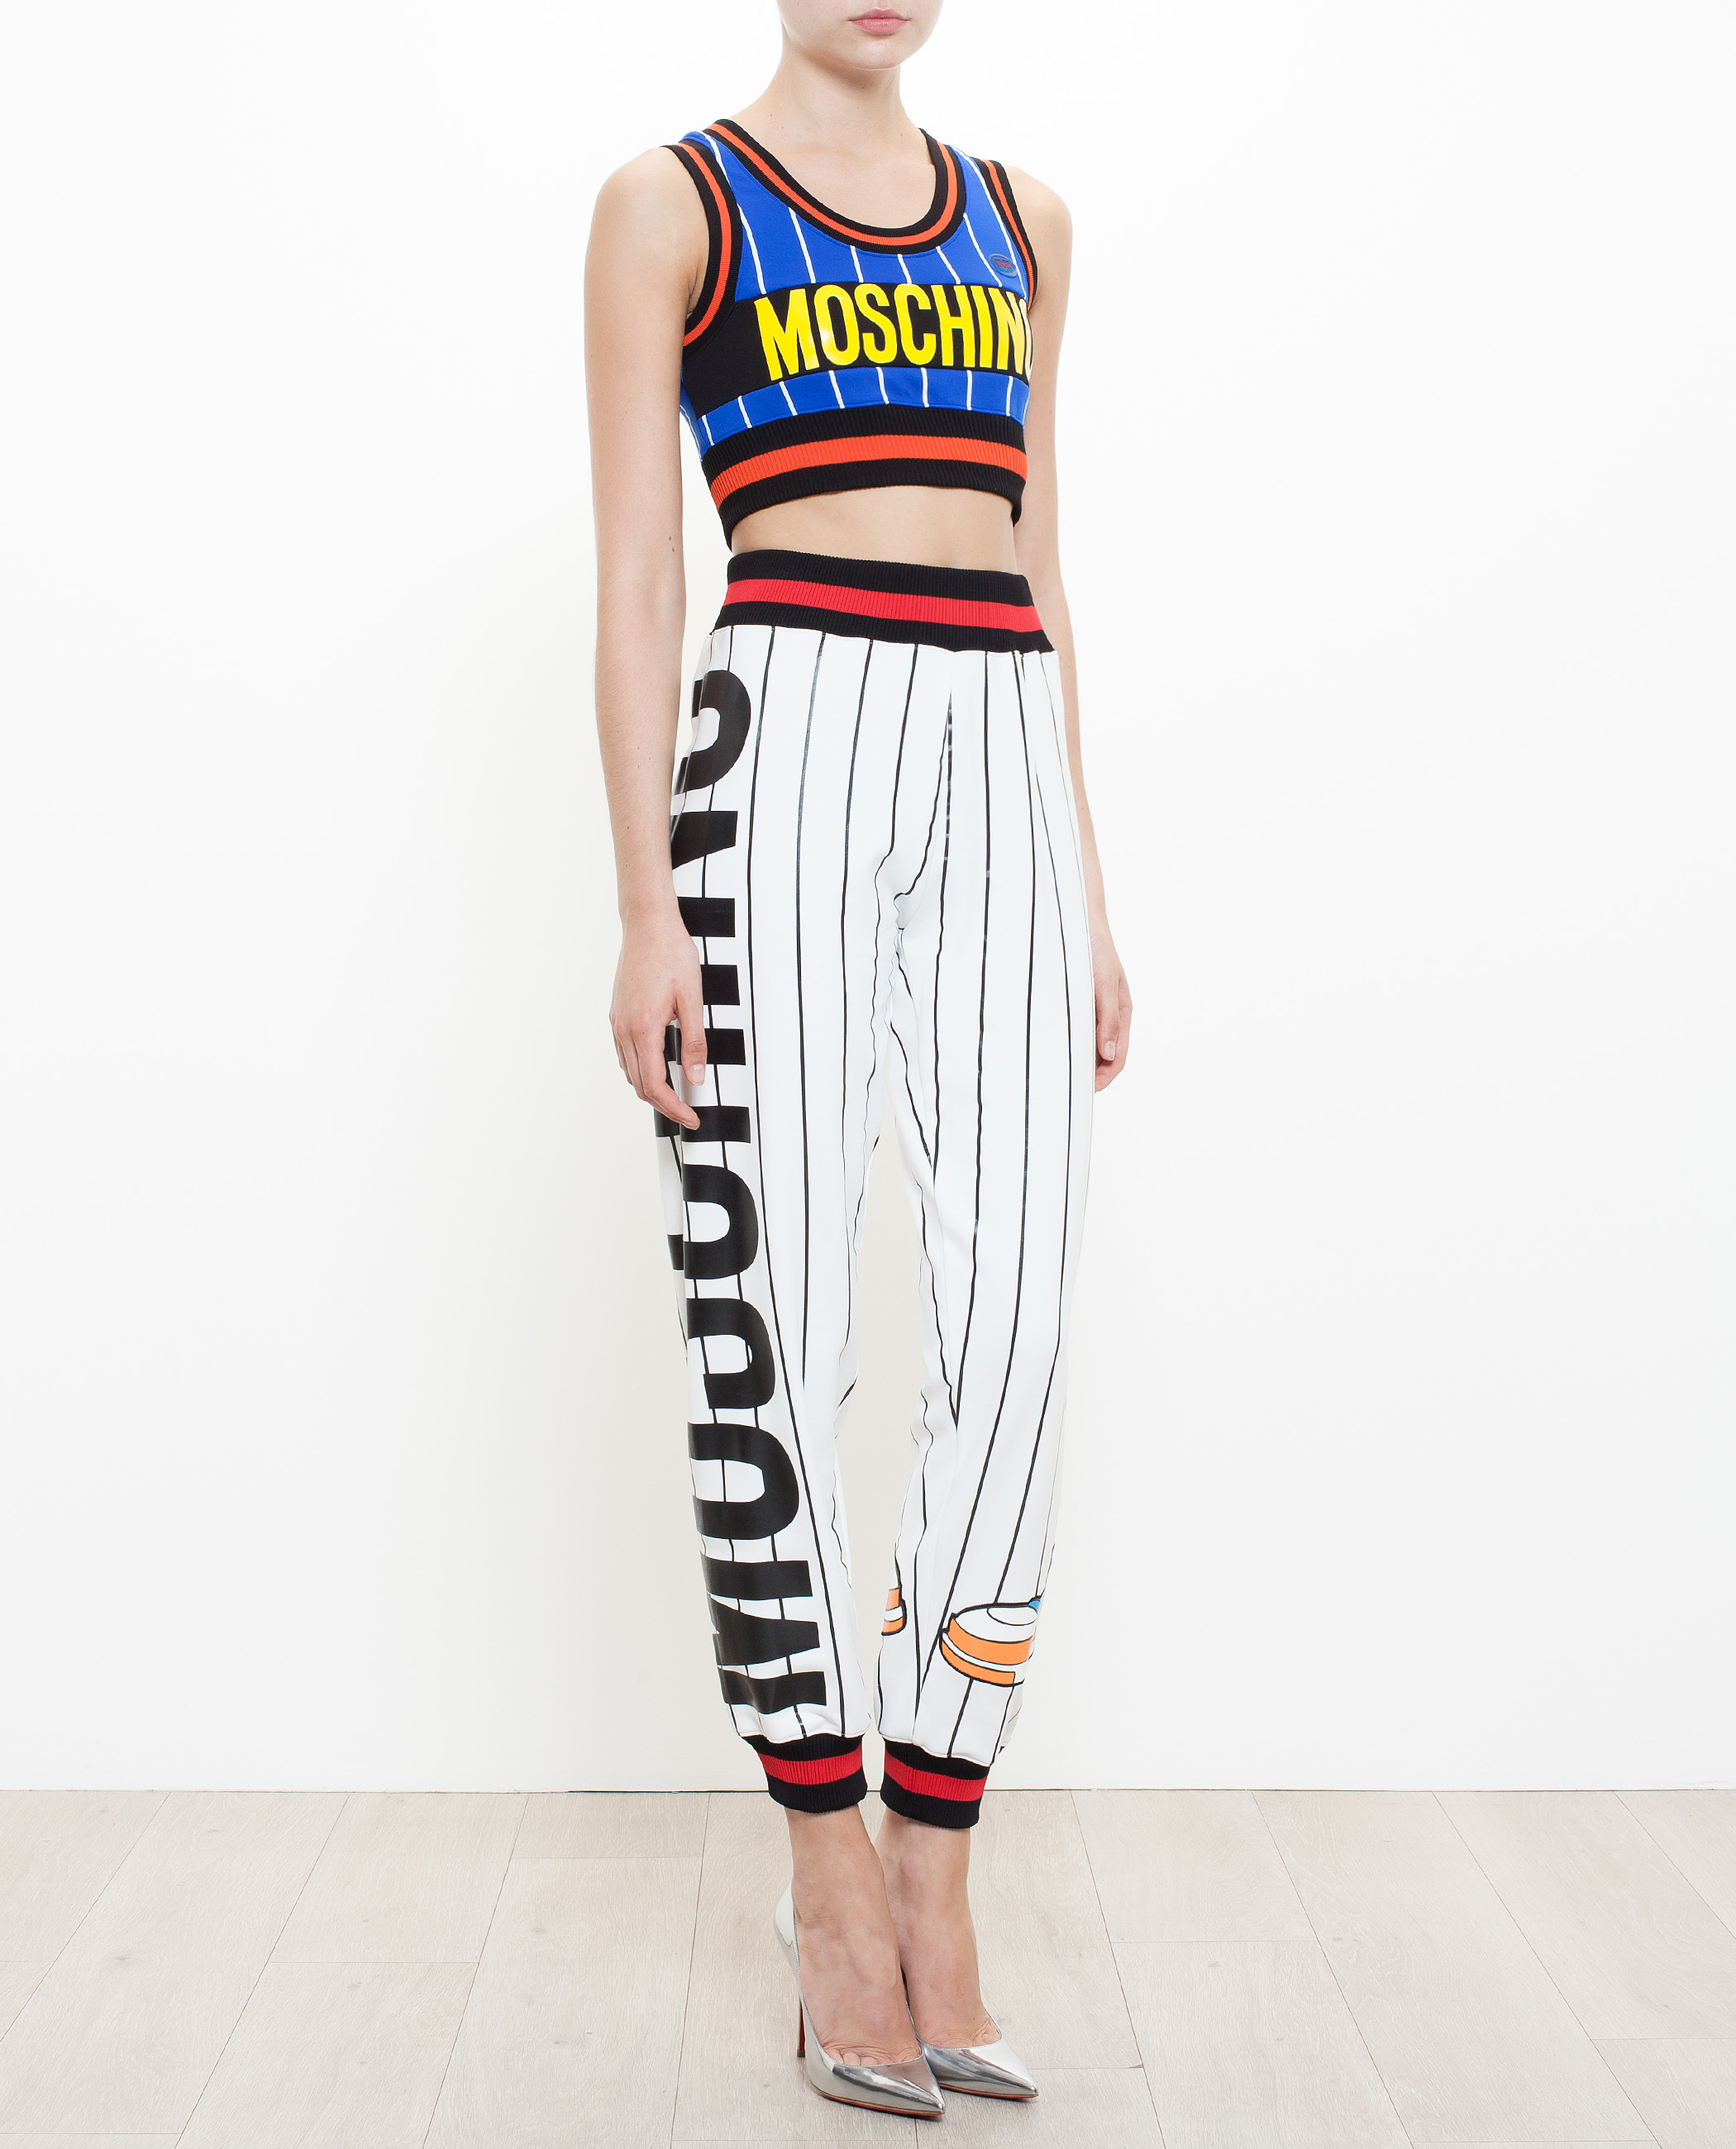 Moschino Striped Crop Top in Blue - Lyst